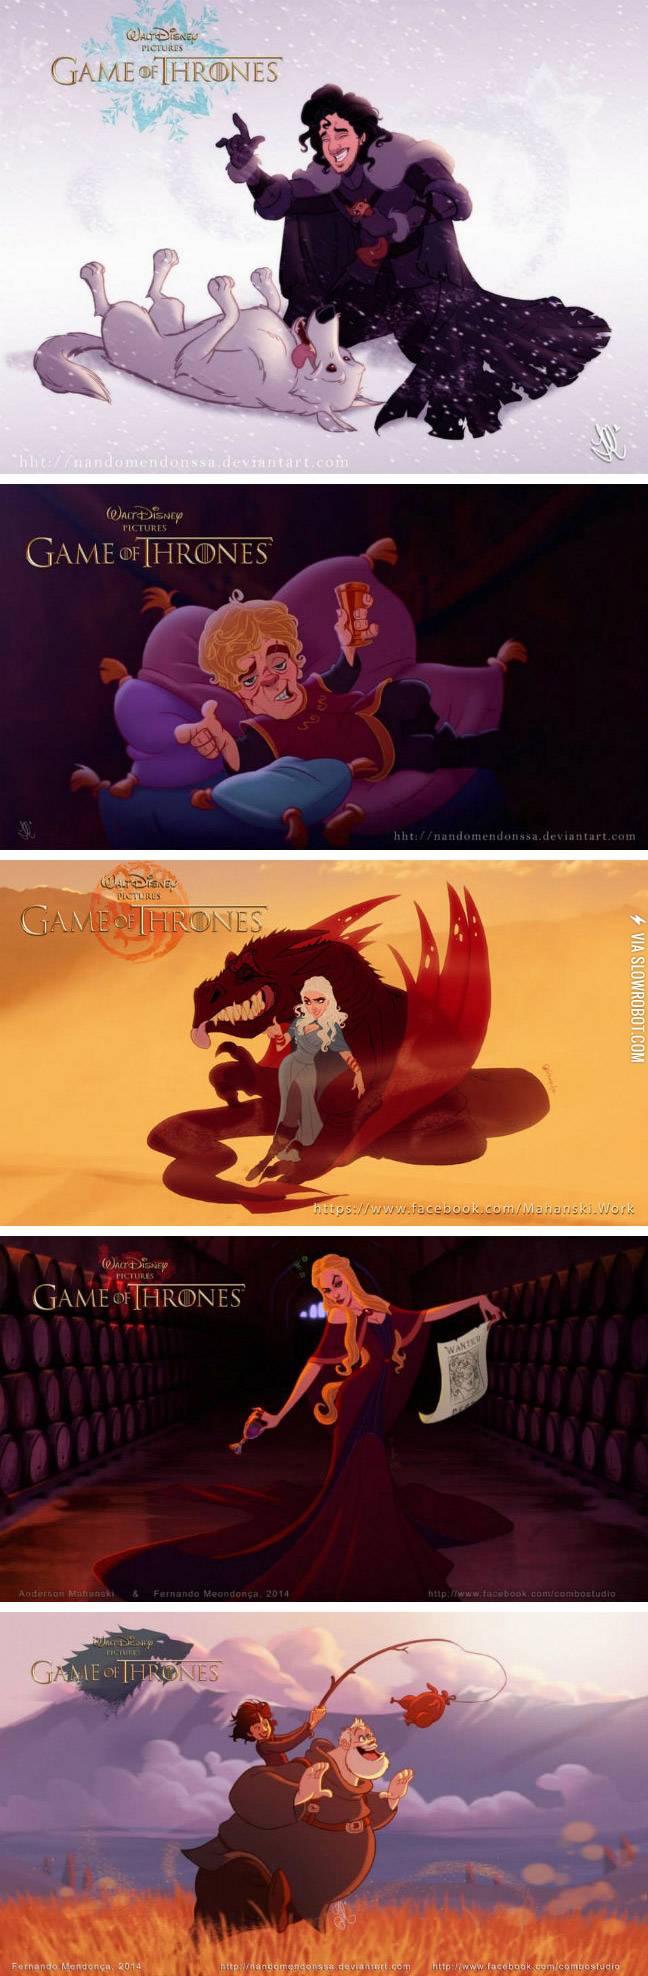 If+Disney+re-made+Game+of+Thrones.